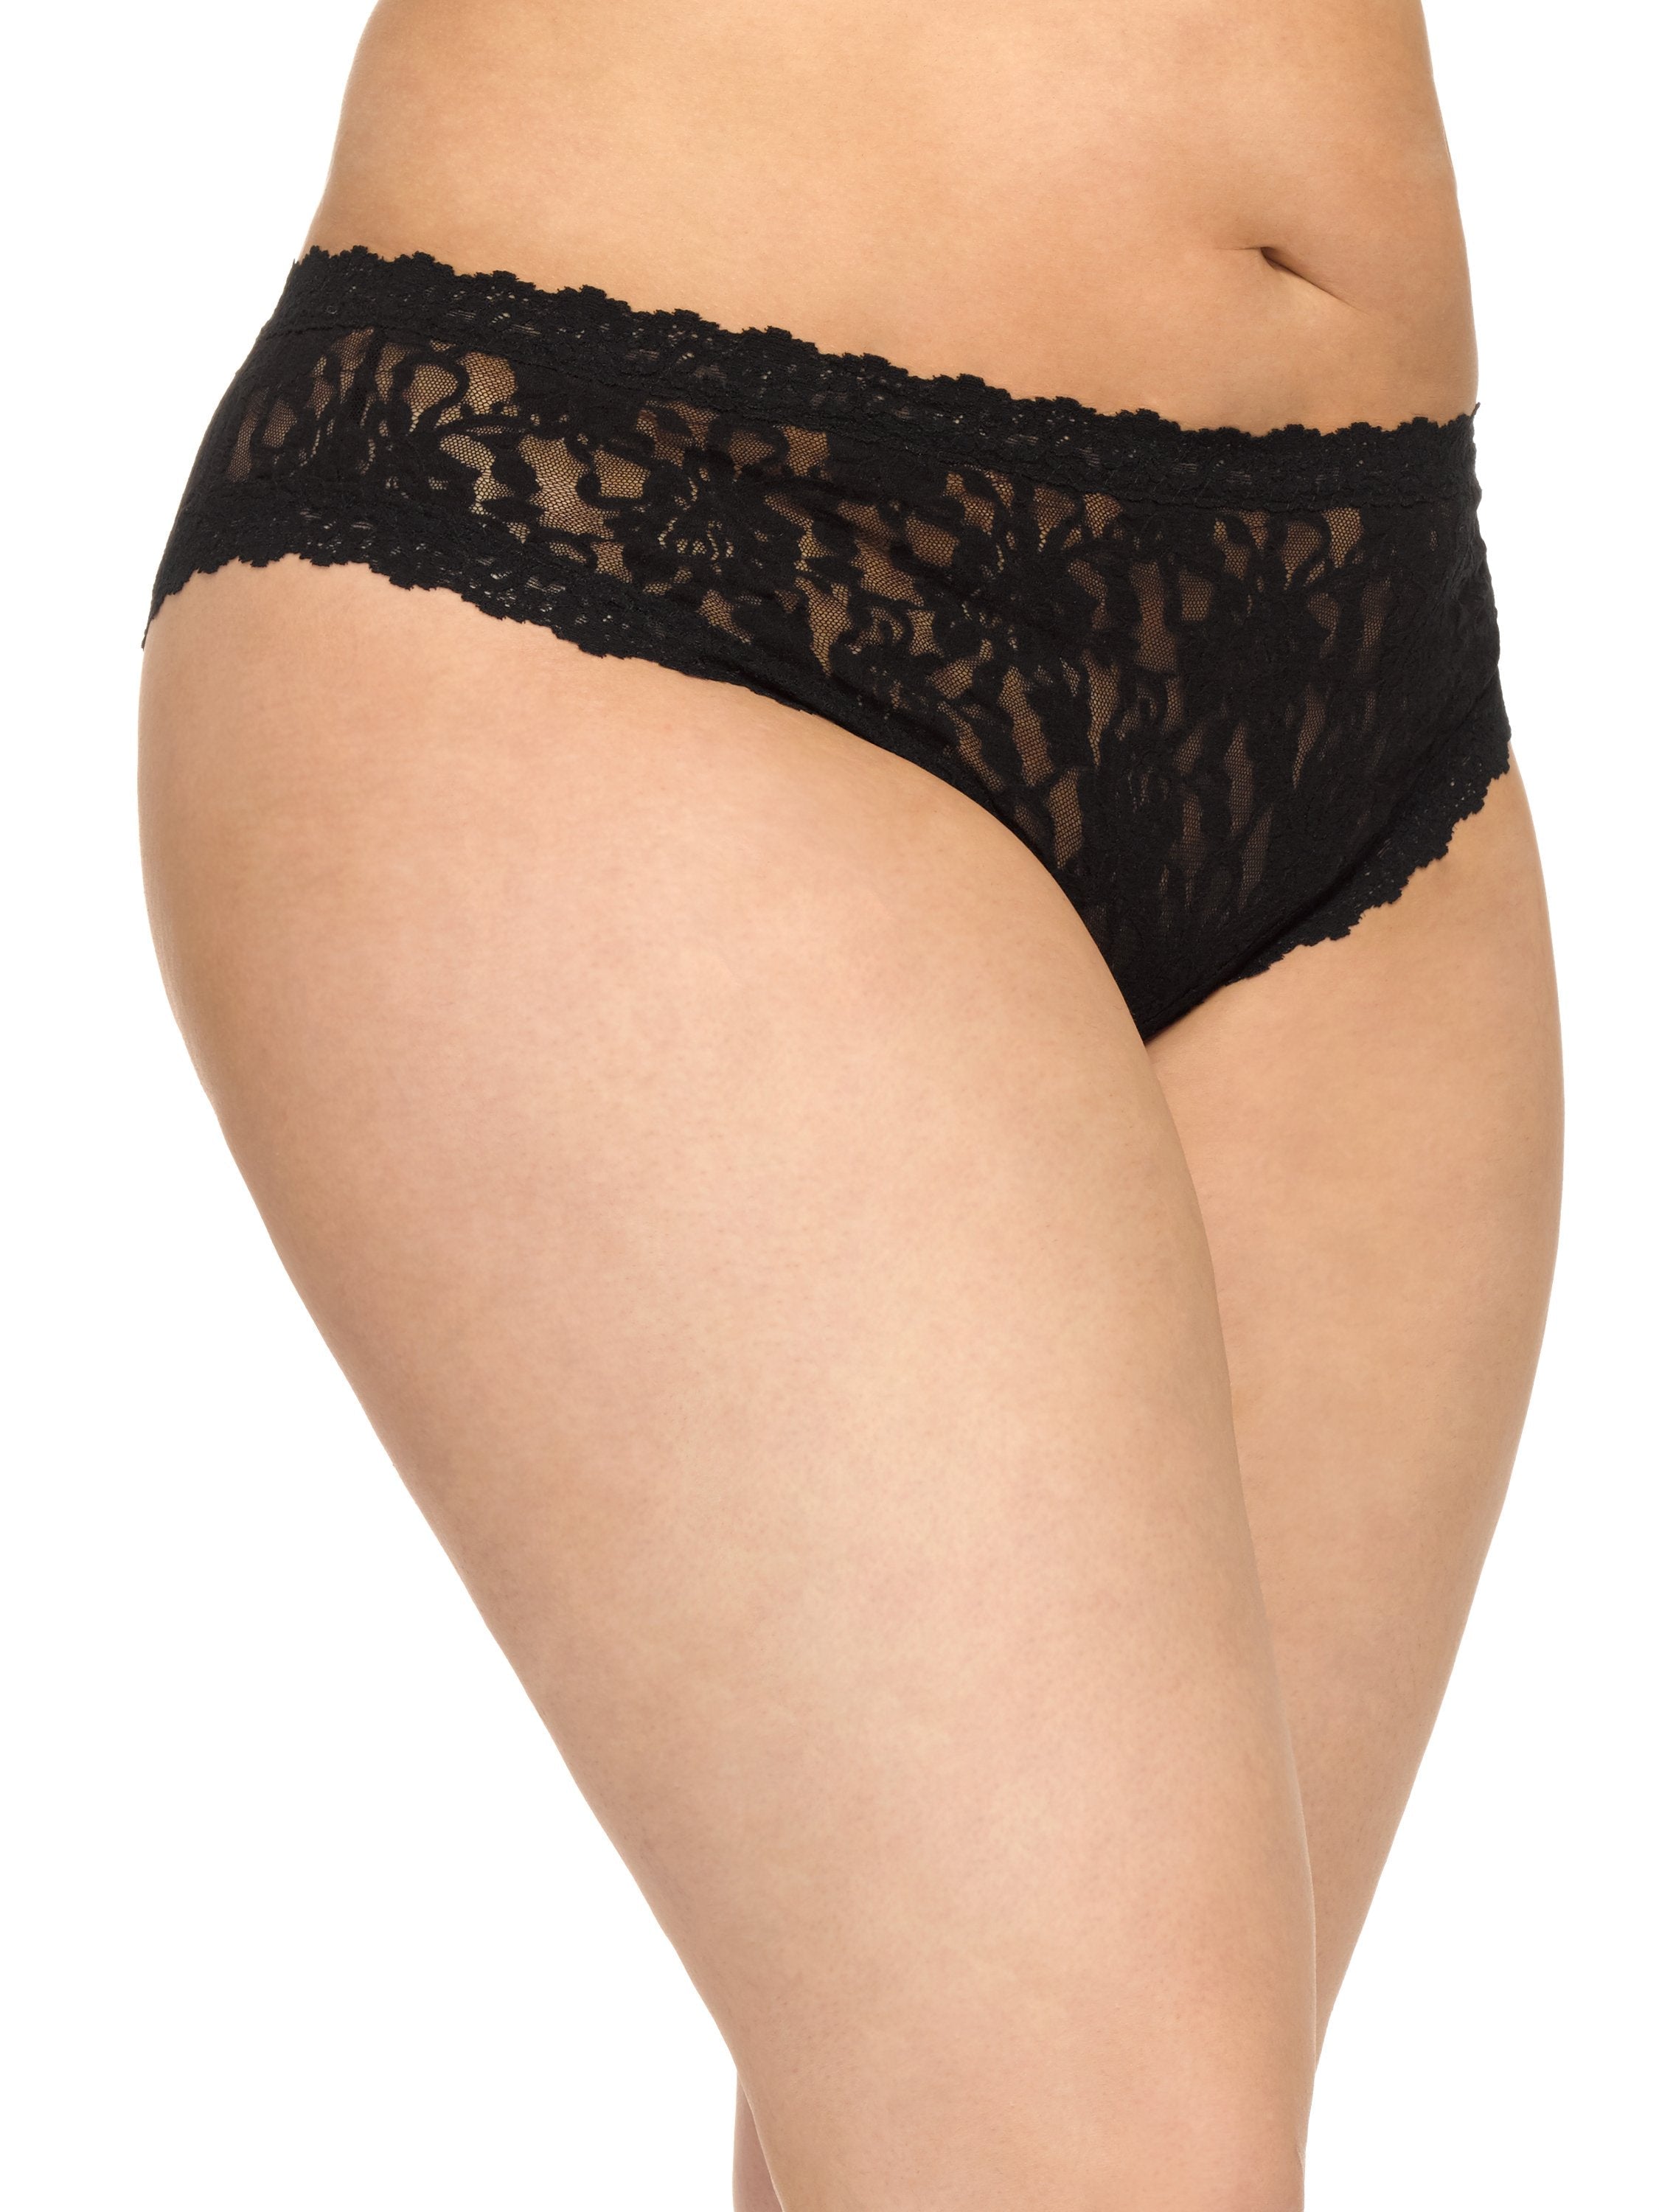 Women's CROTCHLESS PANTY Lace Plus Size HIPSTER 3x/4x Black or Hot Pink